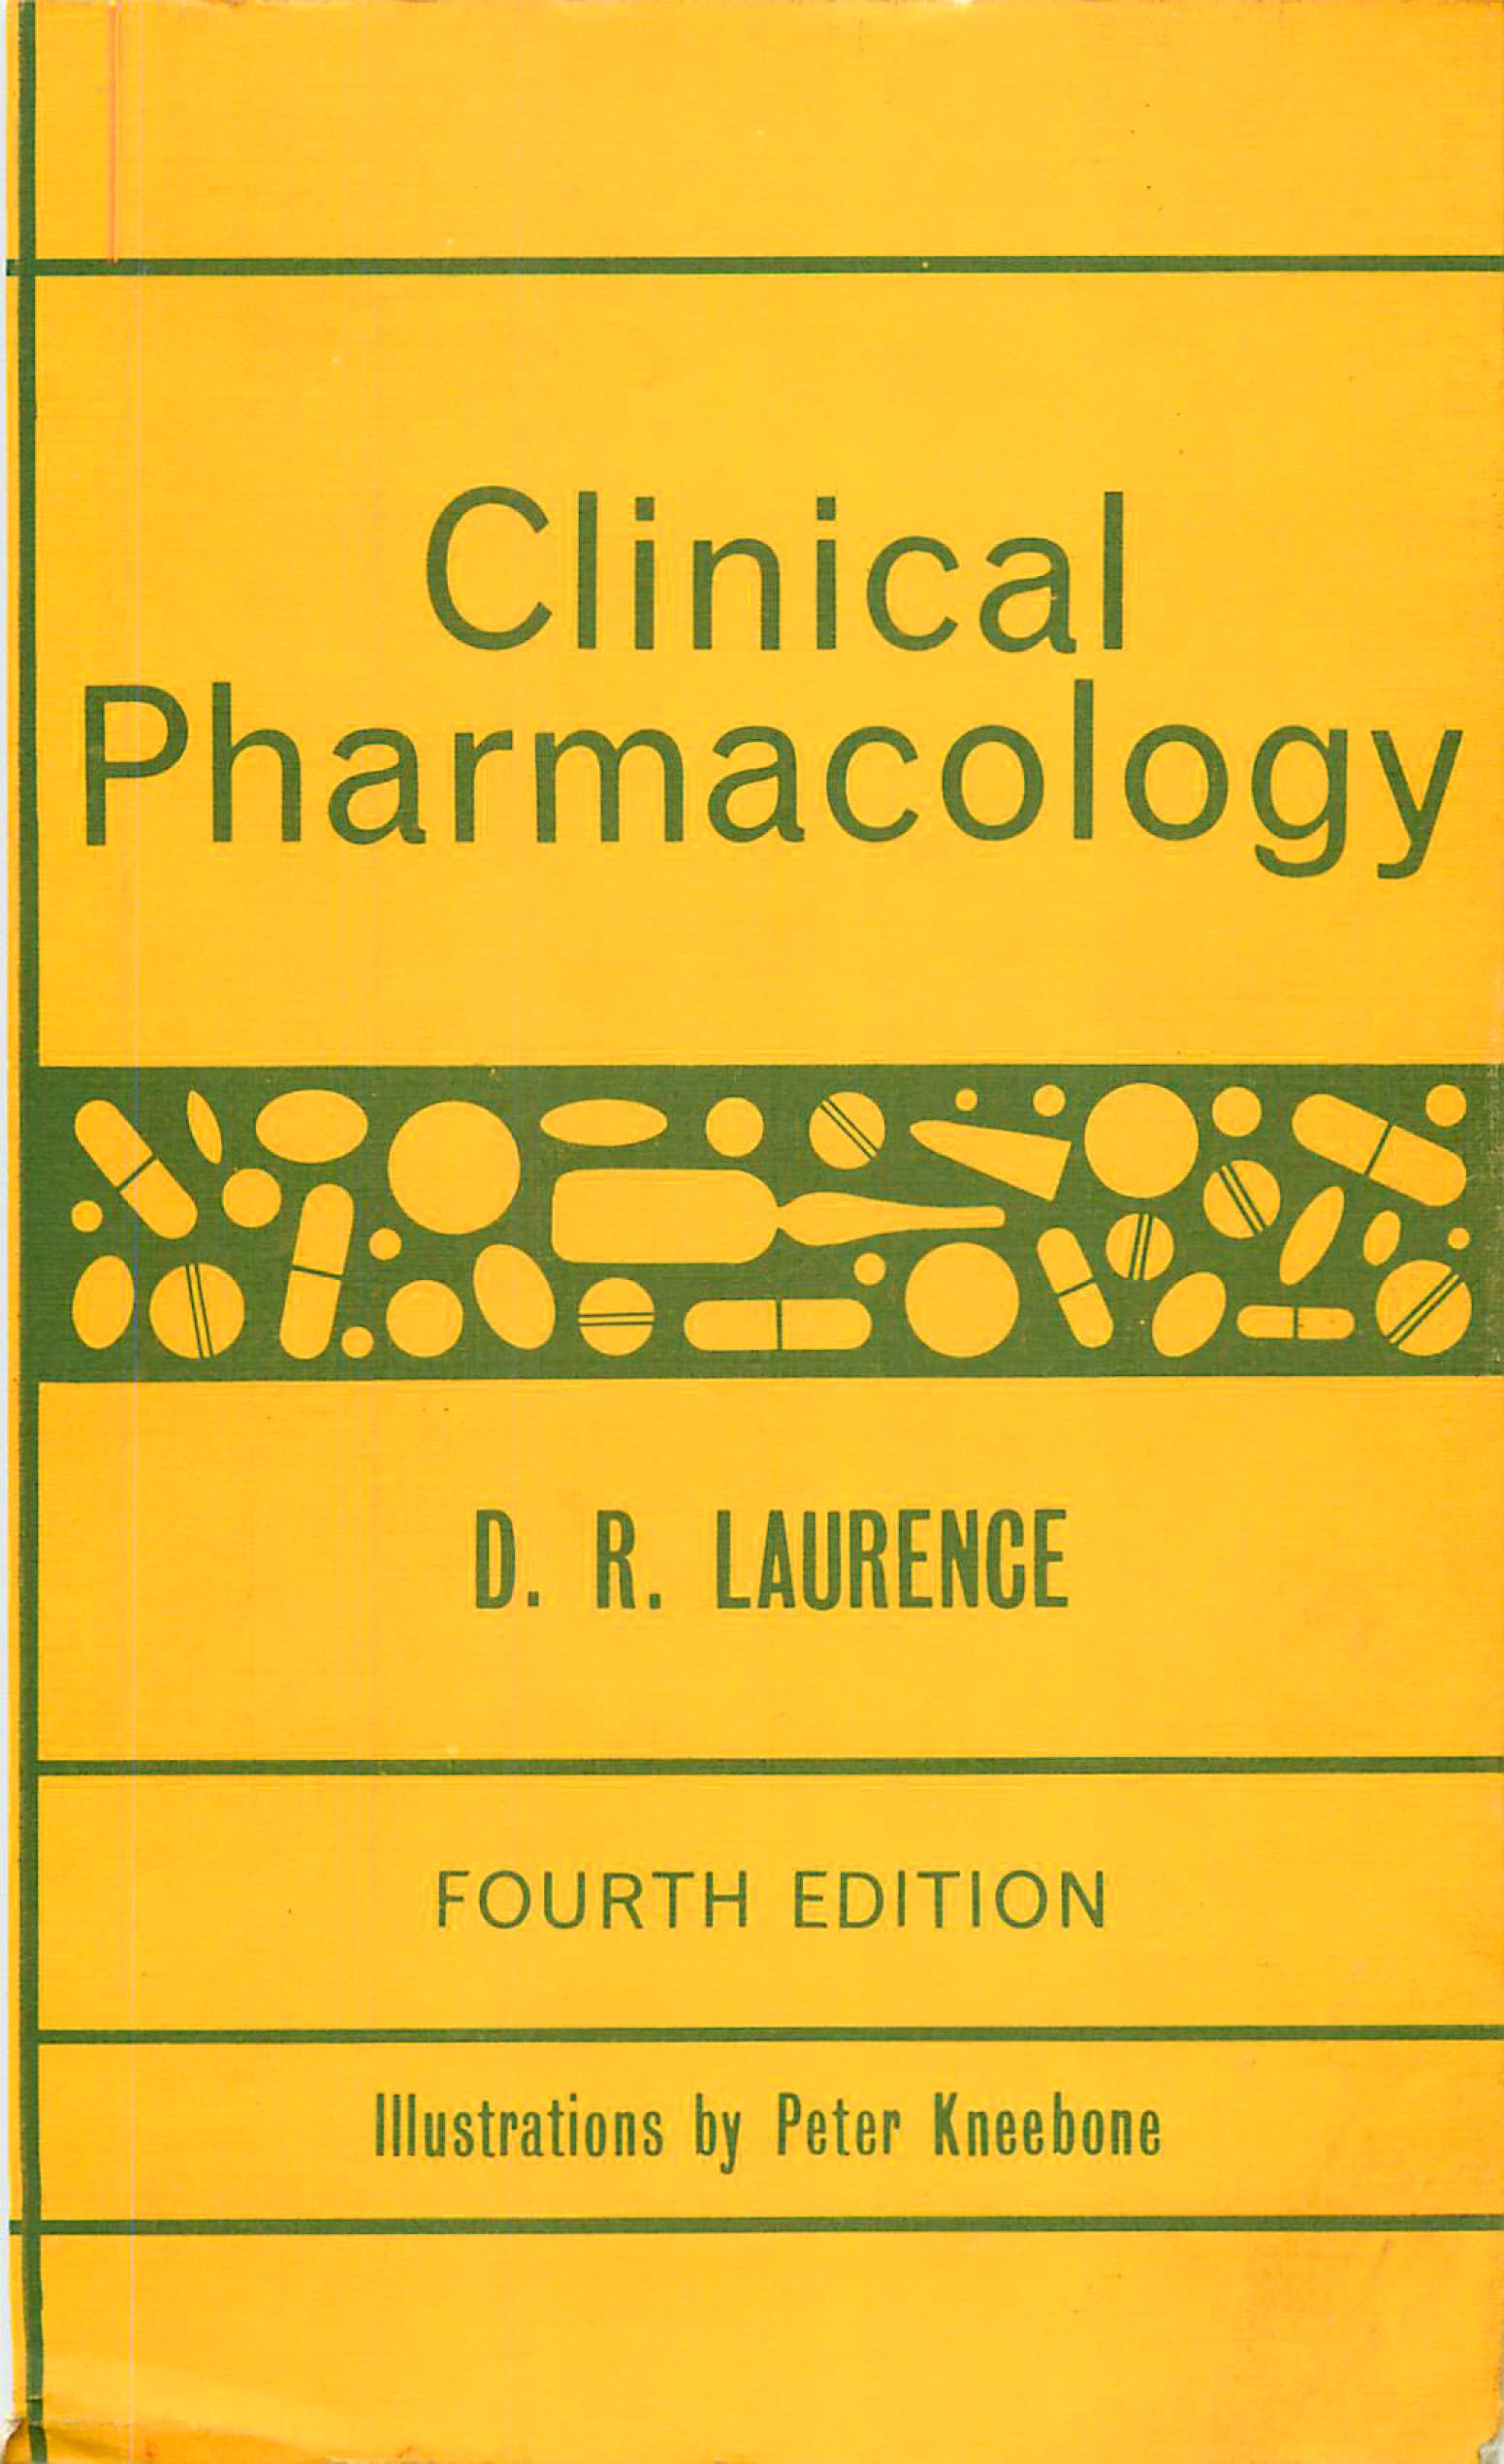 Clinical Pharmacology - D R Laurence